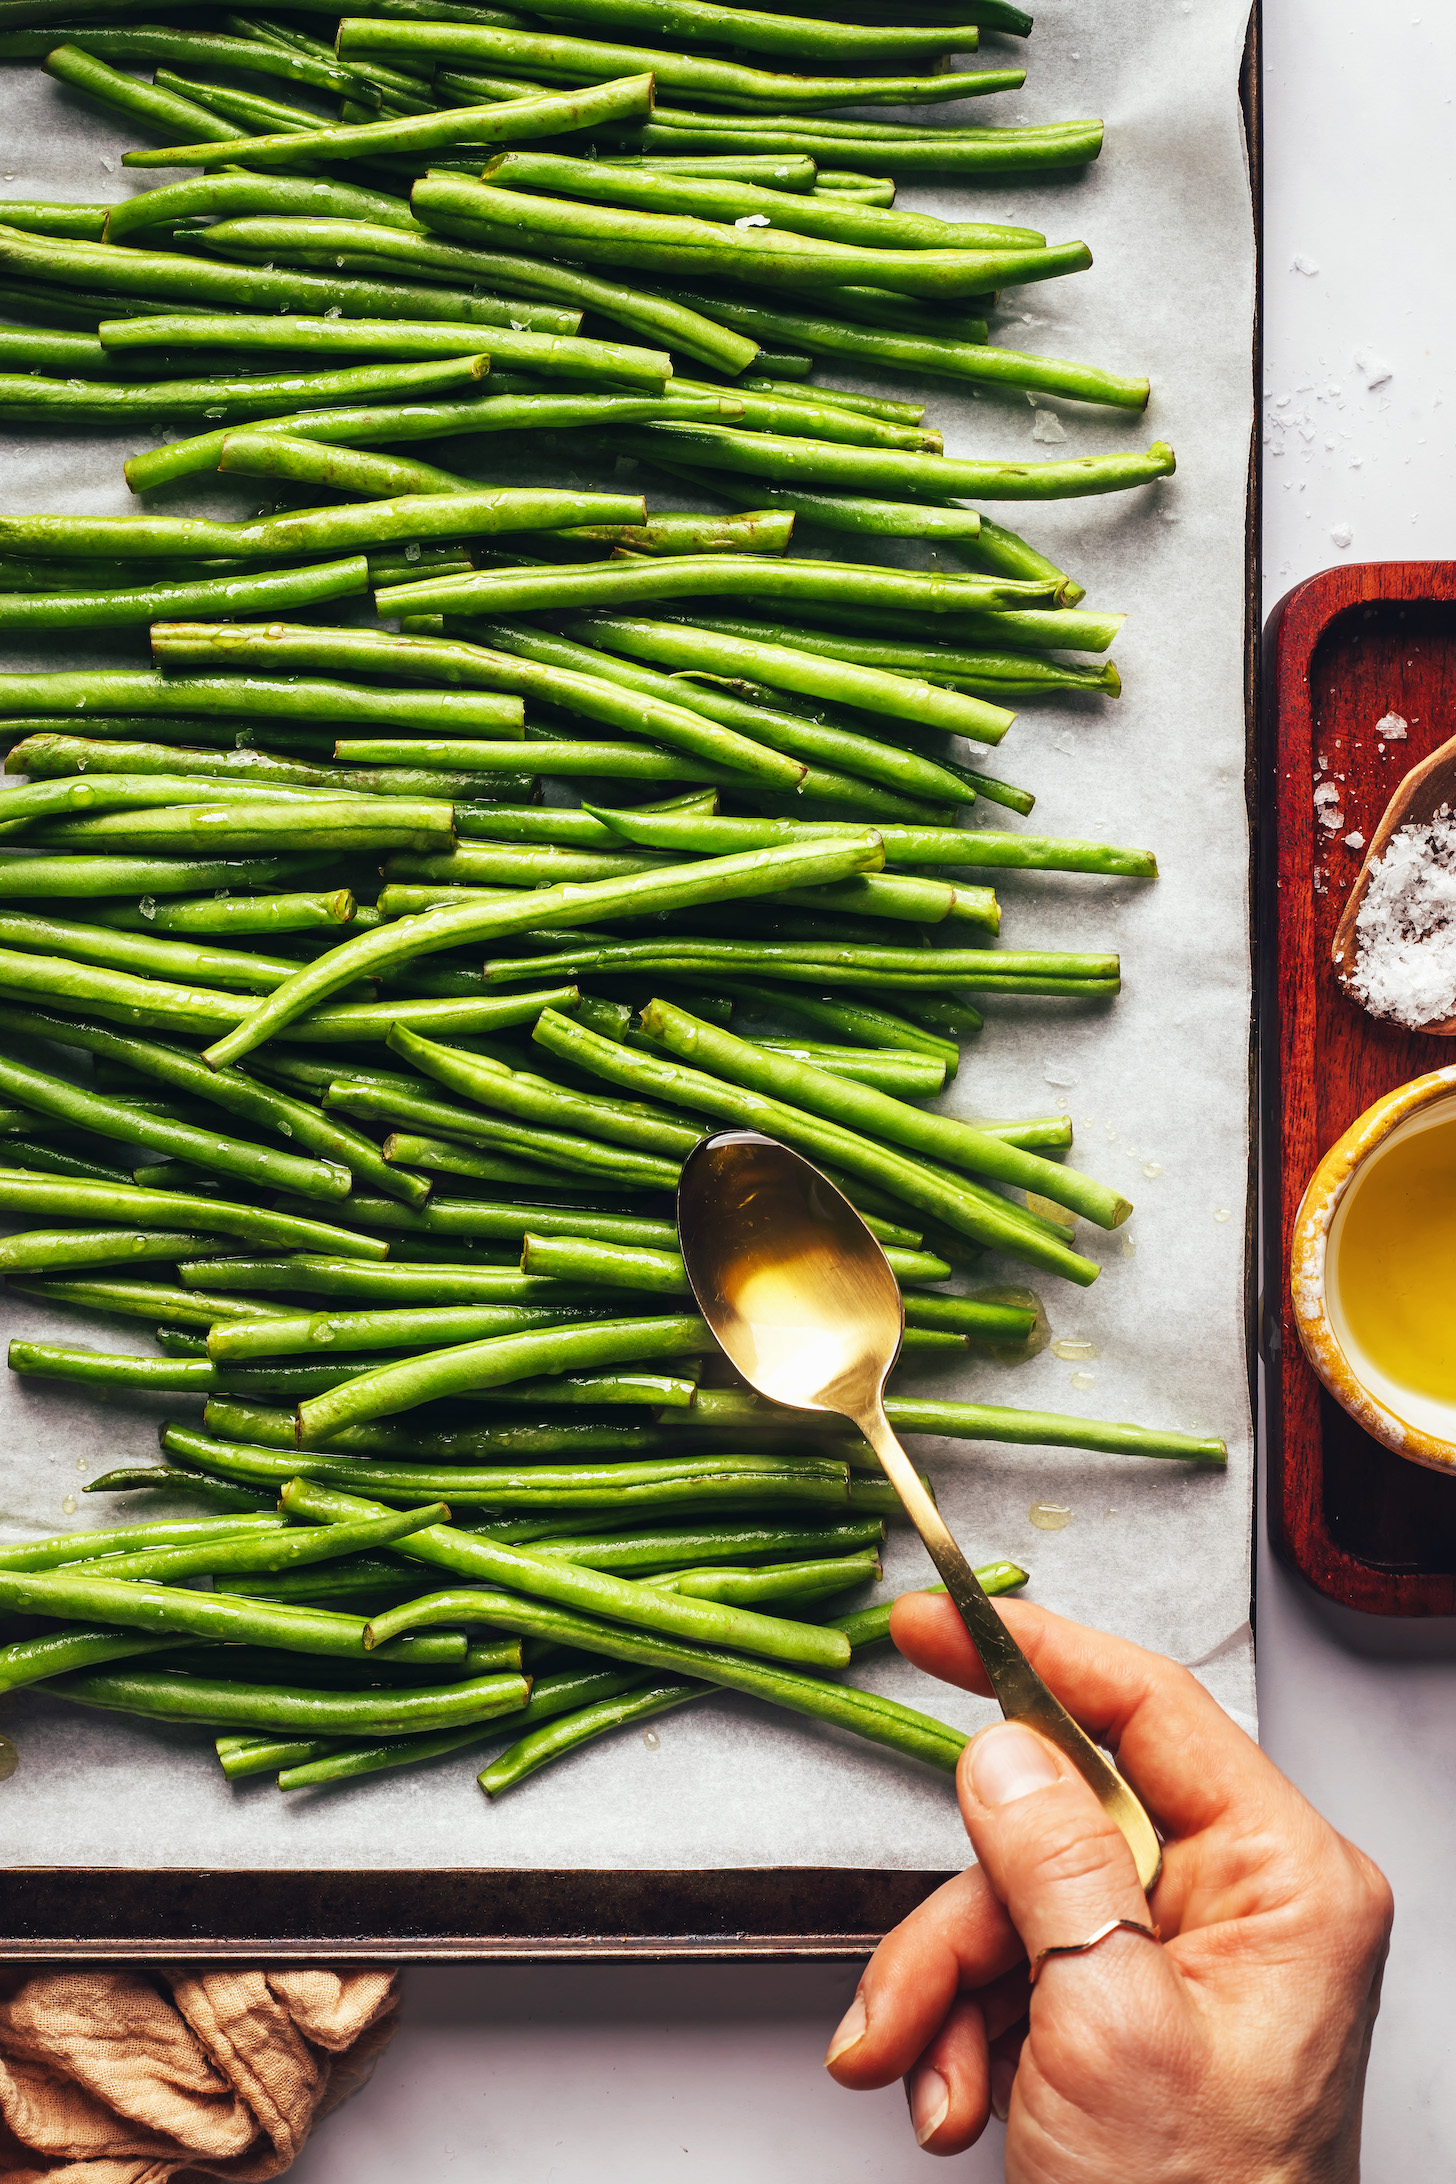 Using a spoon to drizzle olive oil over green beans on a baking sheet